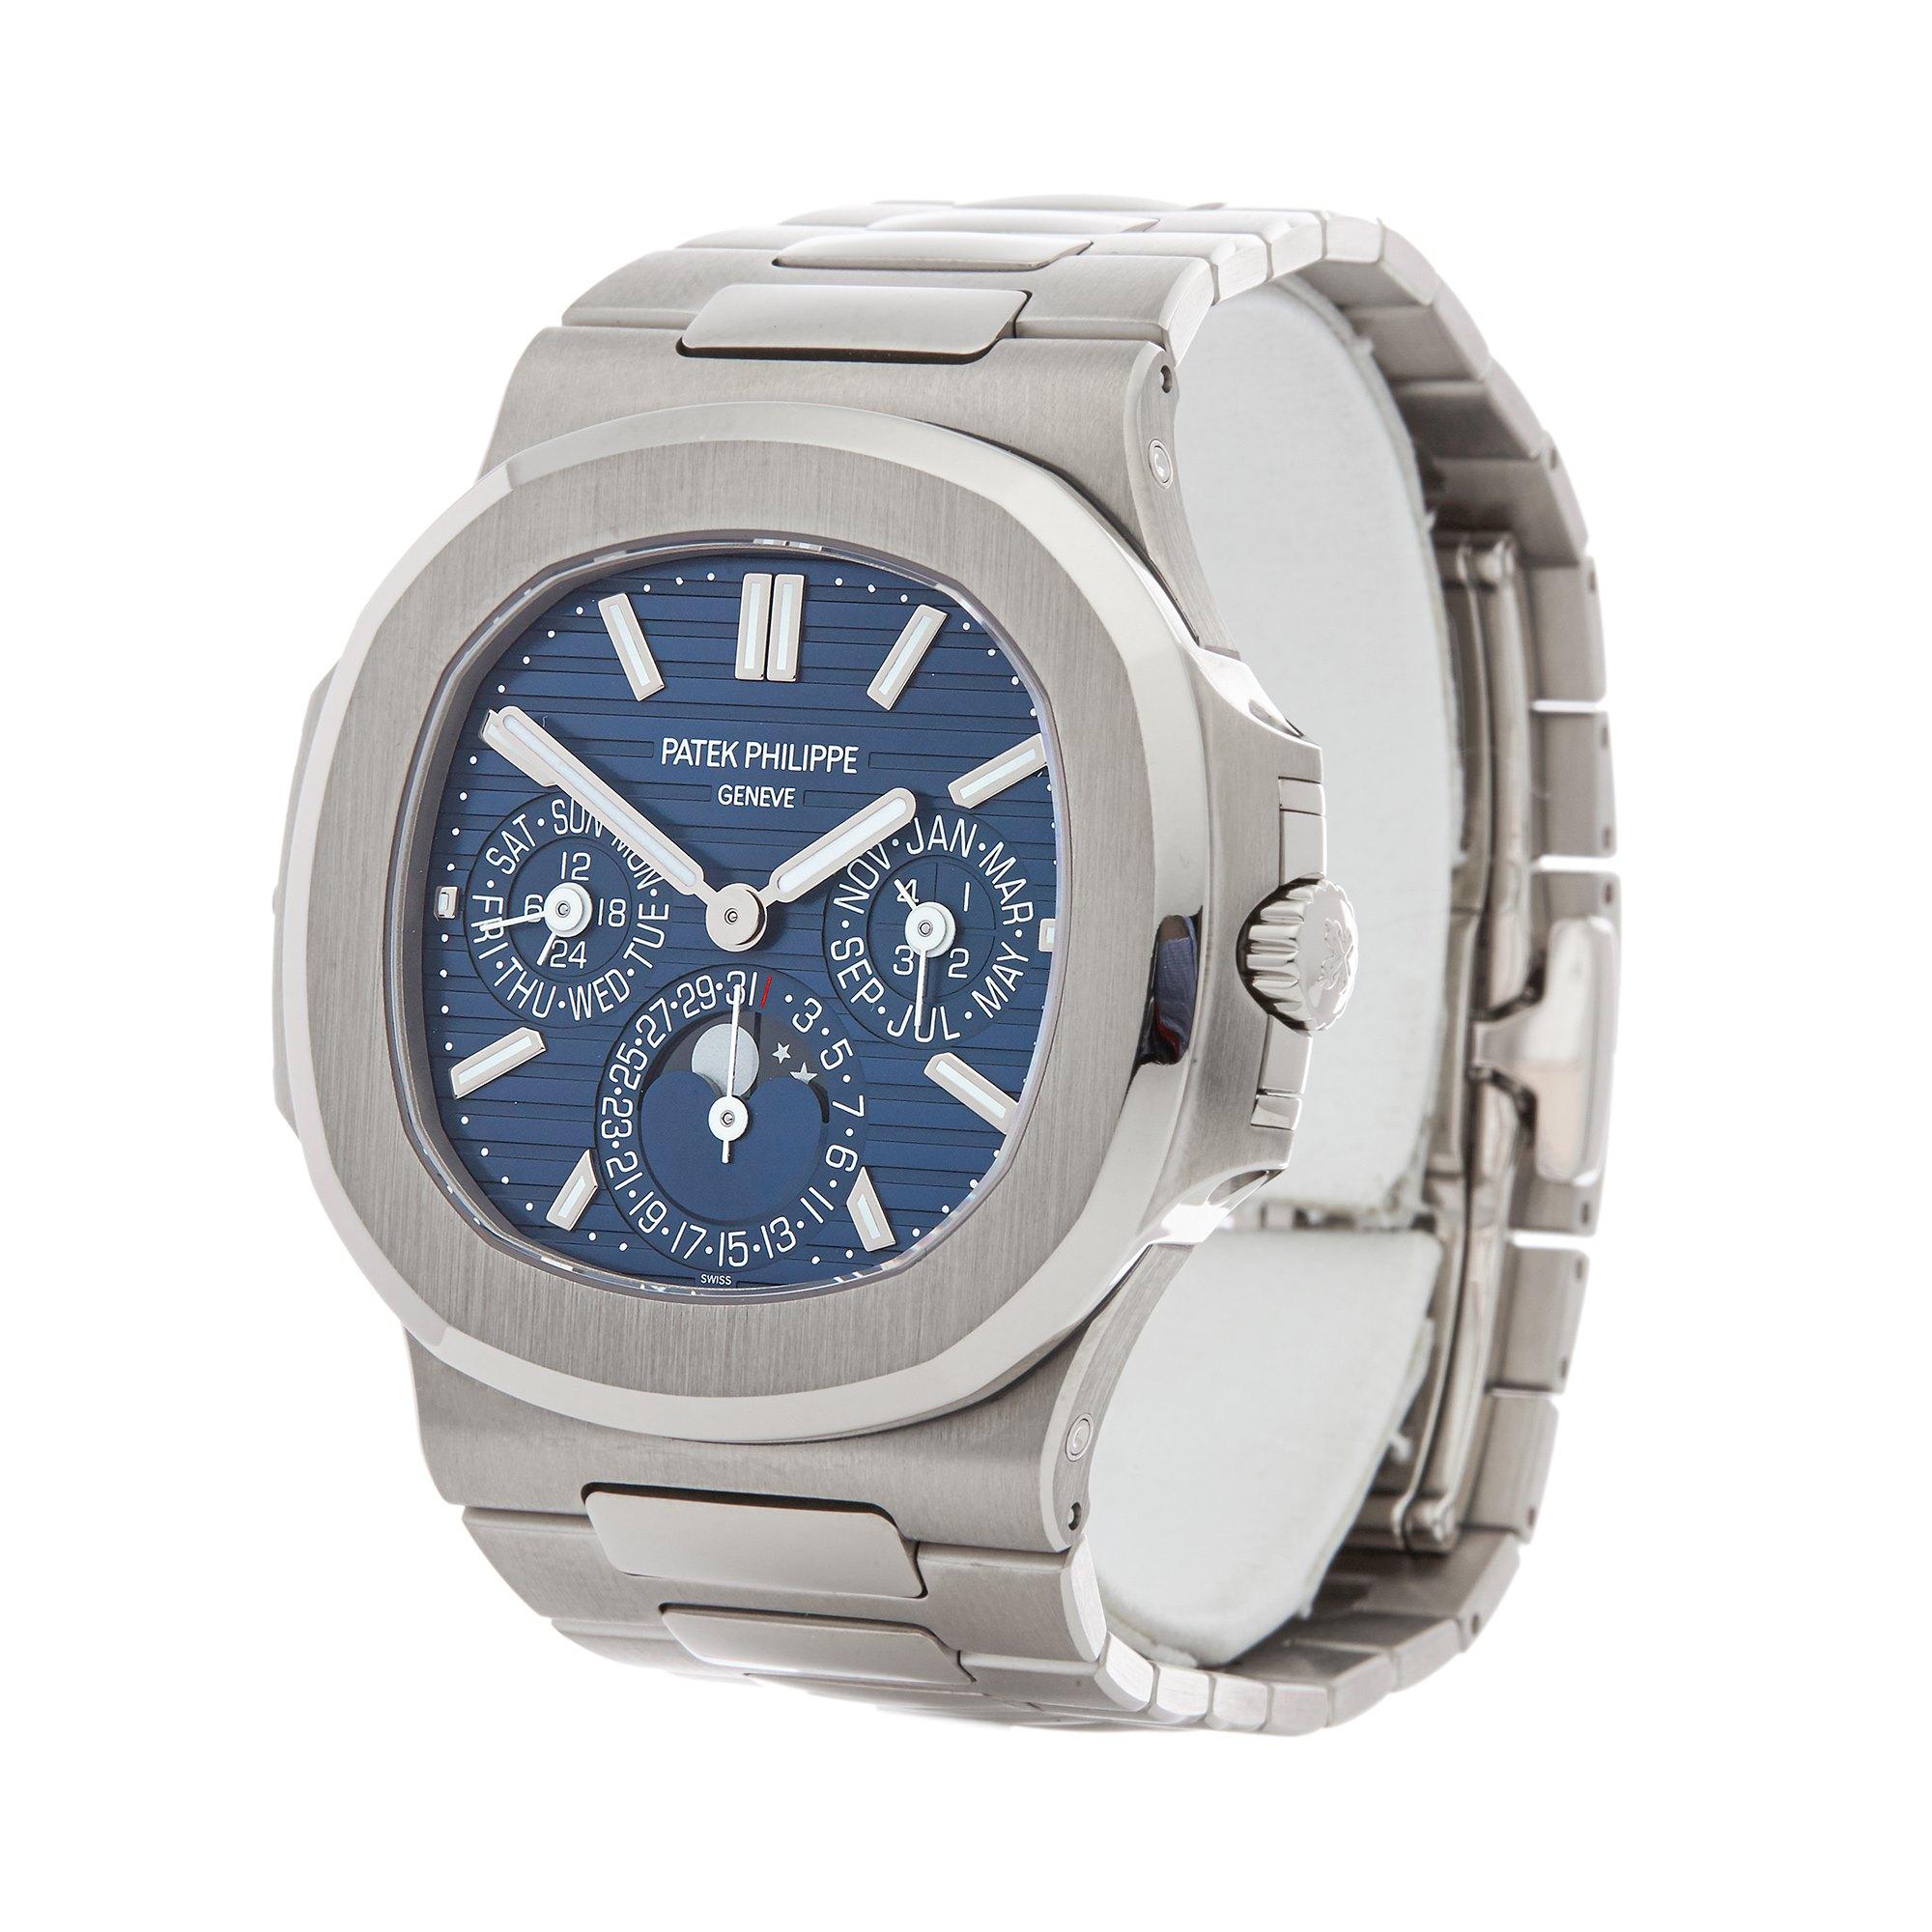 Xupes Reference: COM002577
Manufacturer: Patek Philippe
Model: Nautilus
Model Variant: 0
Model Number: 5740G-001
Age: 43835
Gender: Men
Complete With: Patek Philippe Box, Manual, Booklet, Sales Literature, Pusher & Guarantee
Dial: Blue Baton
Glass: